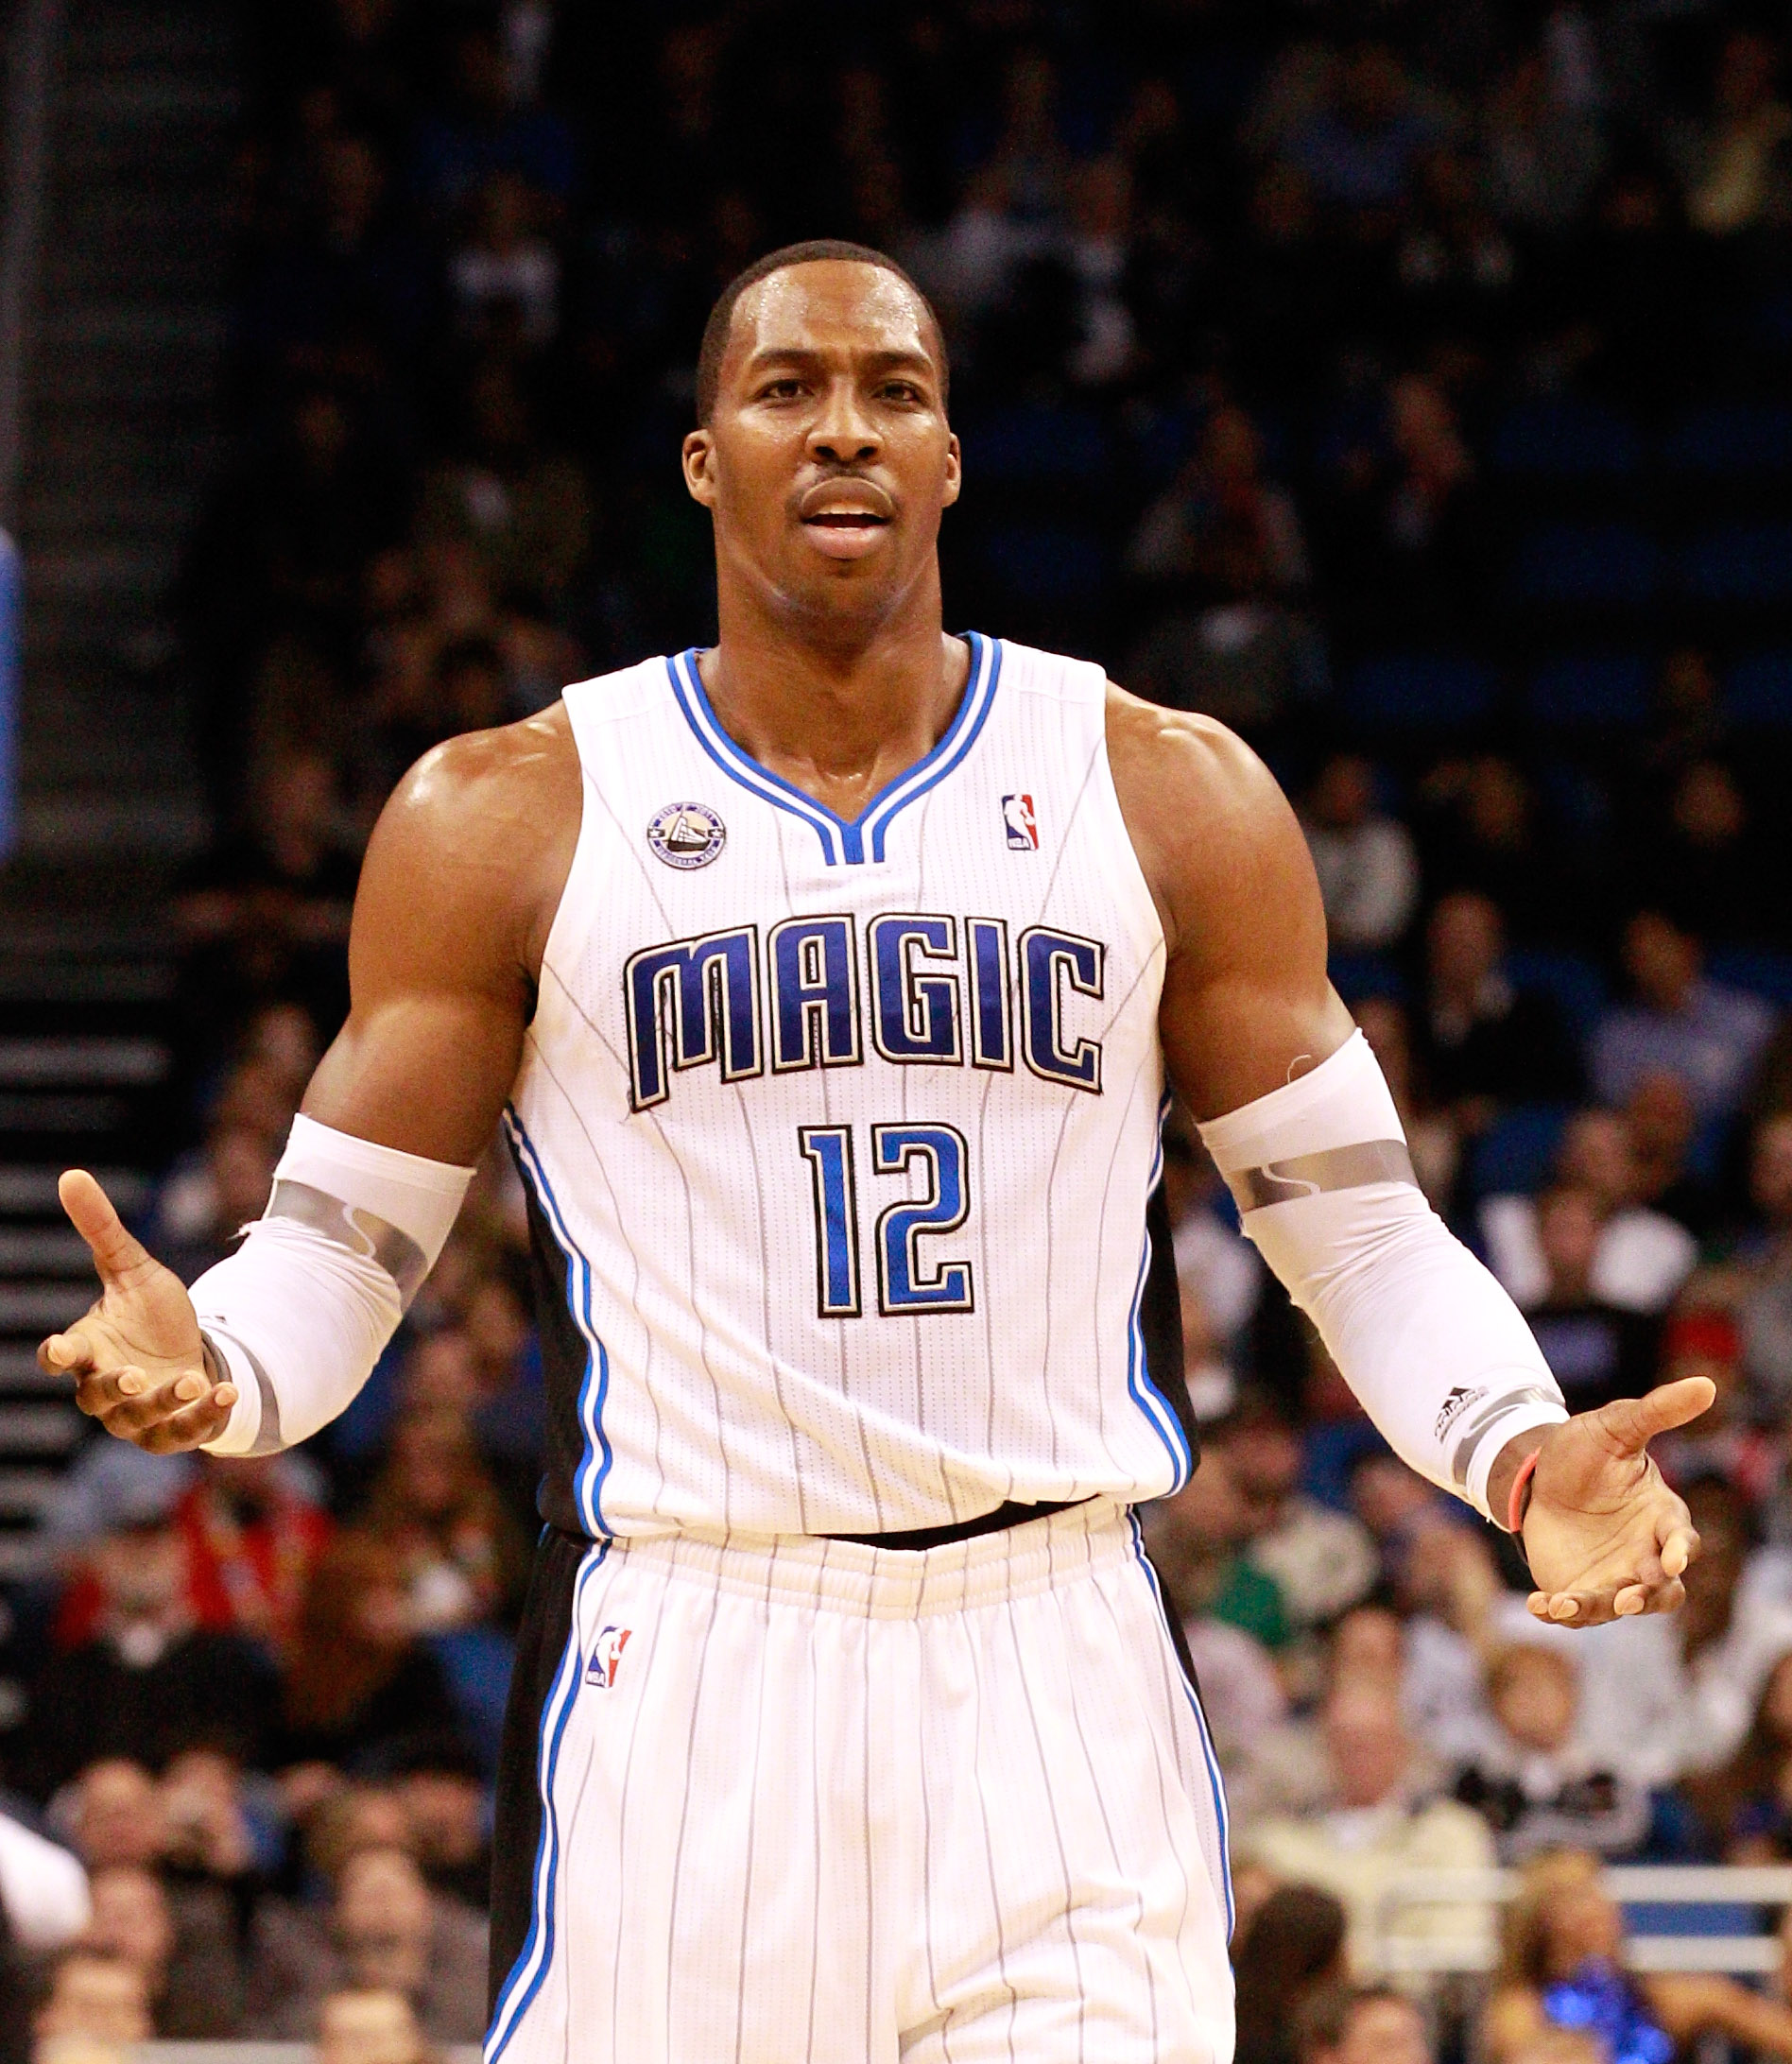 NBA player Dwight Howard of the Orlando Magic teaches Chinese fans